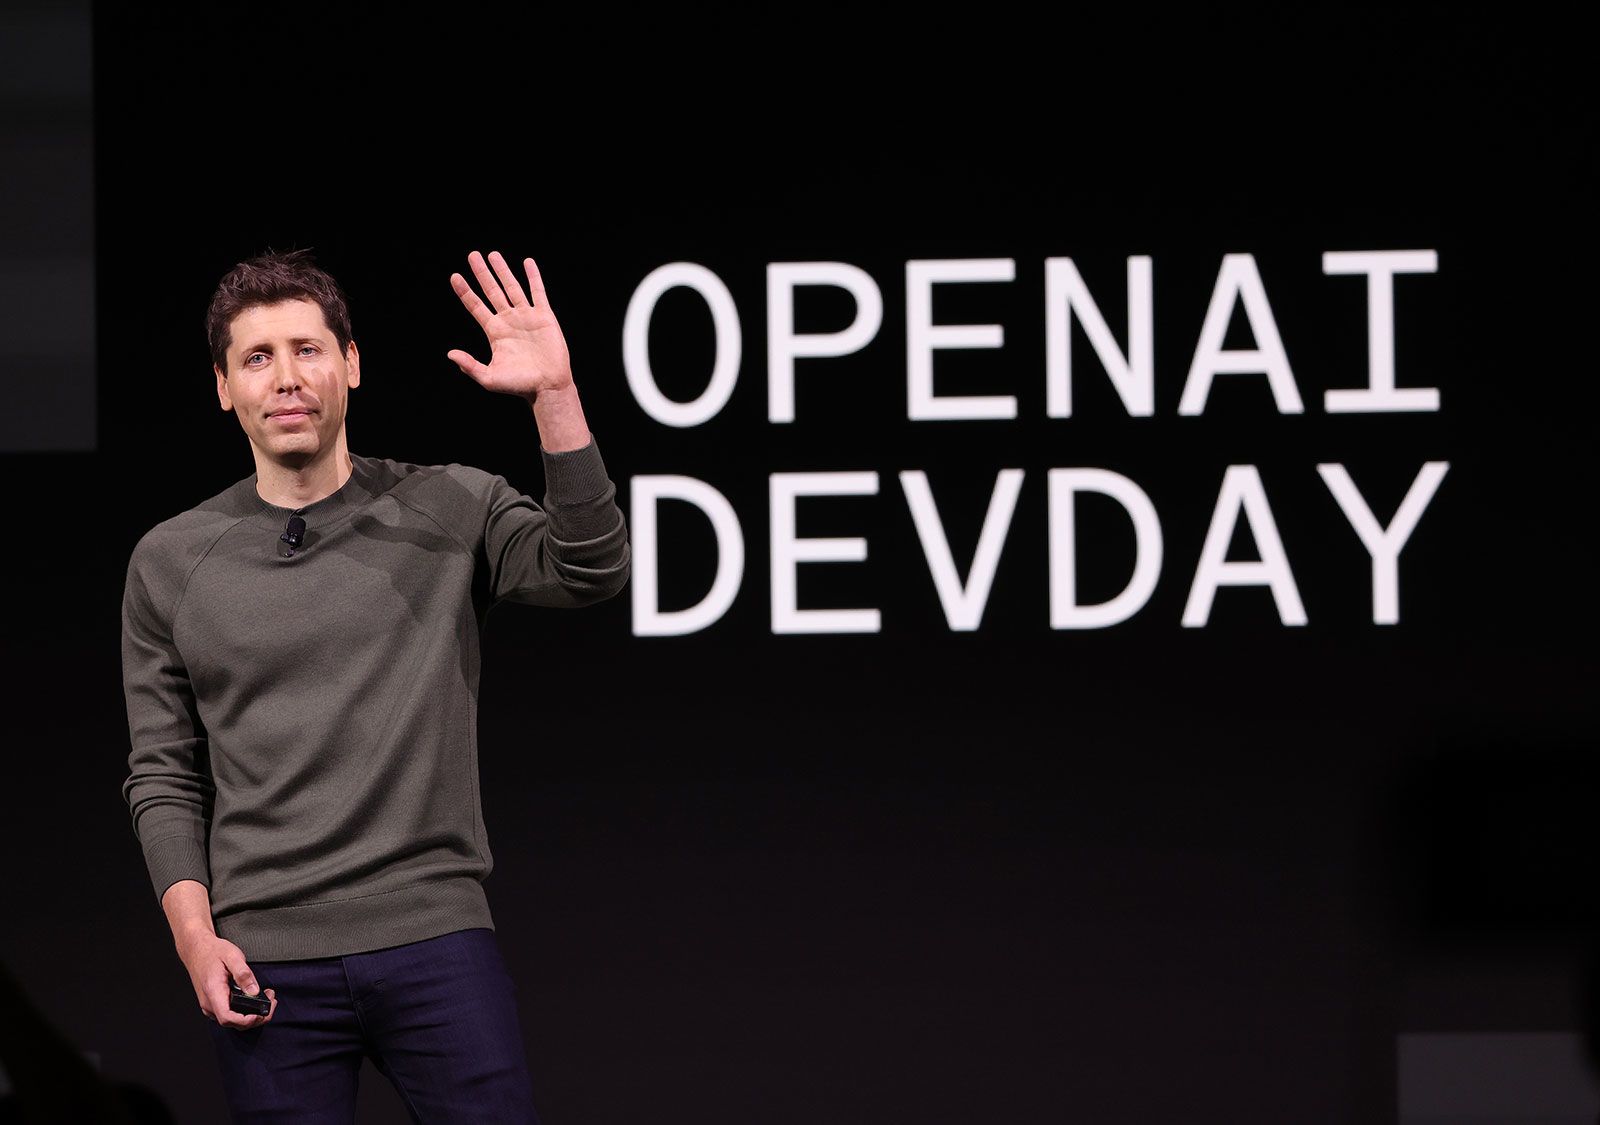 OpenAI is opening its first office outside the US